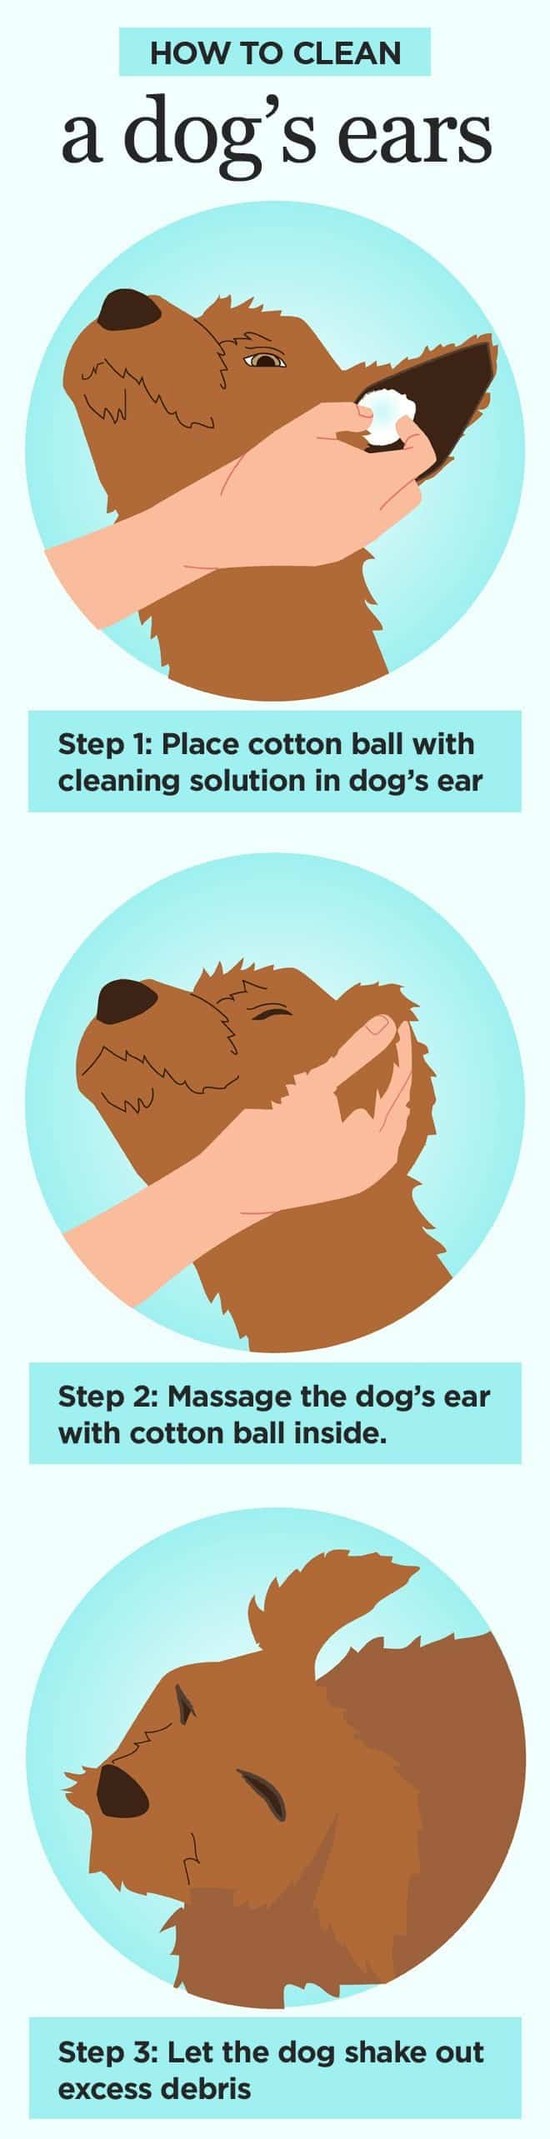 How to Clean Dogs’ Ears: Step by Step Instructions for ...